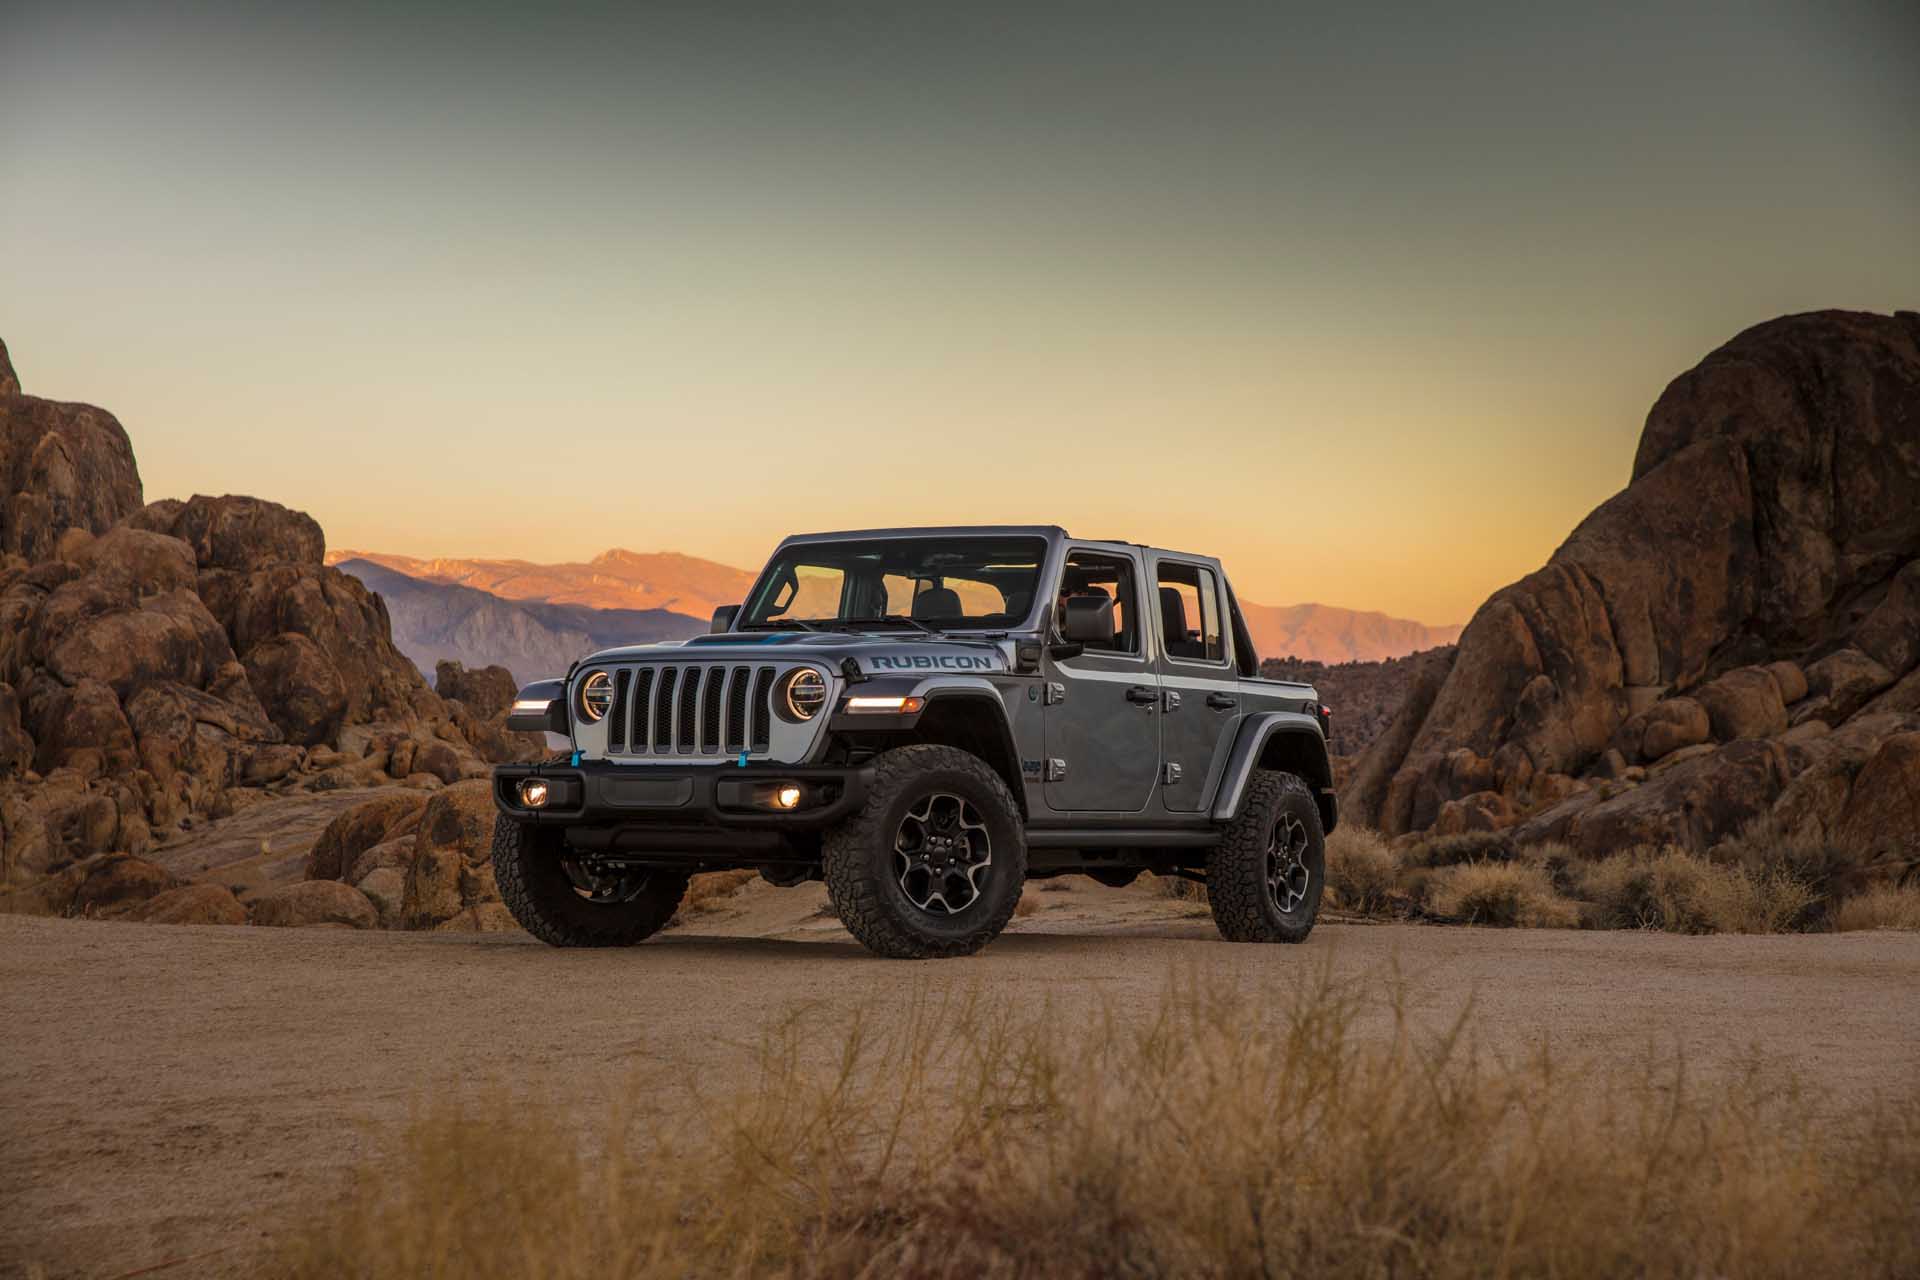 Off-road lift kit for Jeep Wrangler 4xe is a plug-in hybrid first